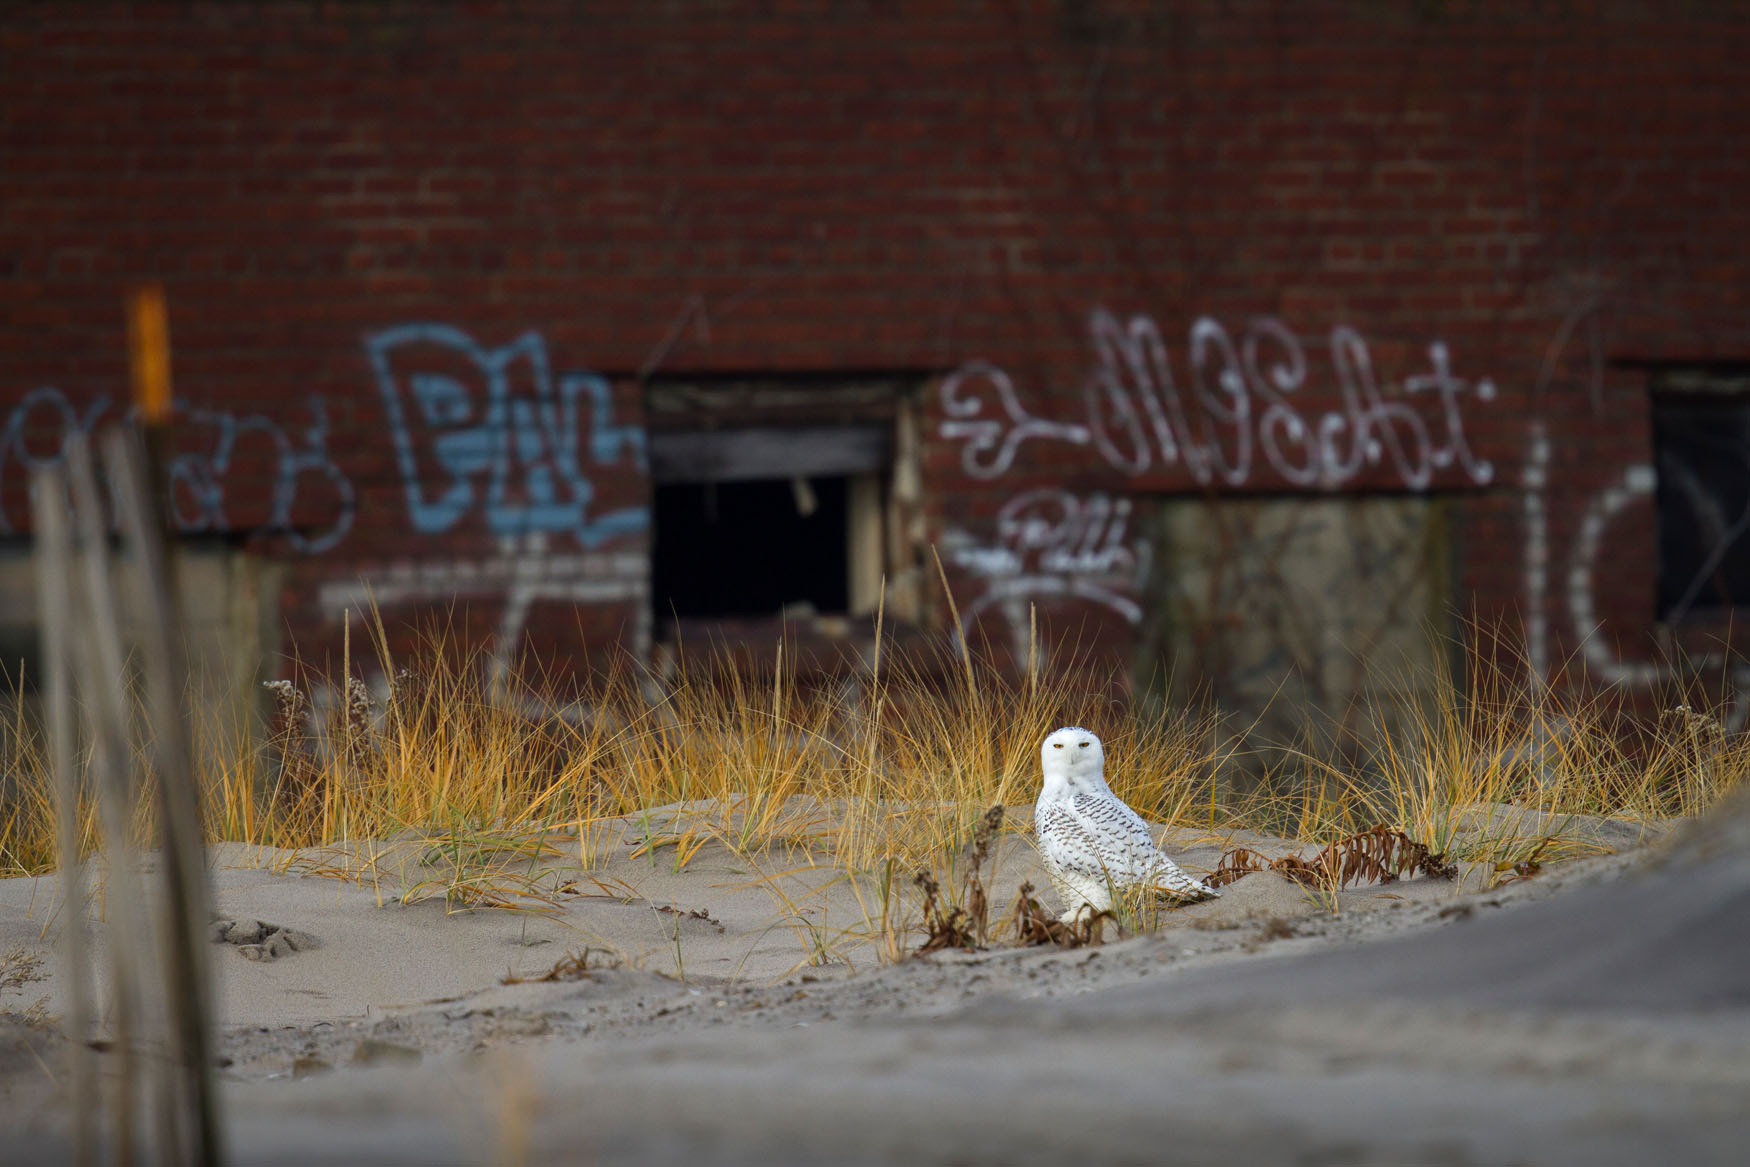 Fort Tilden is one of the best spots in the City to find winter visitors like Snow Buntings and Snowy Owls. Photo: François Portmann